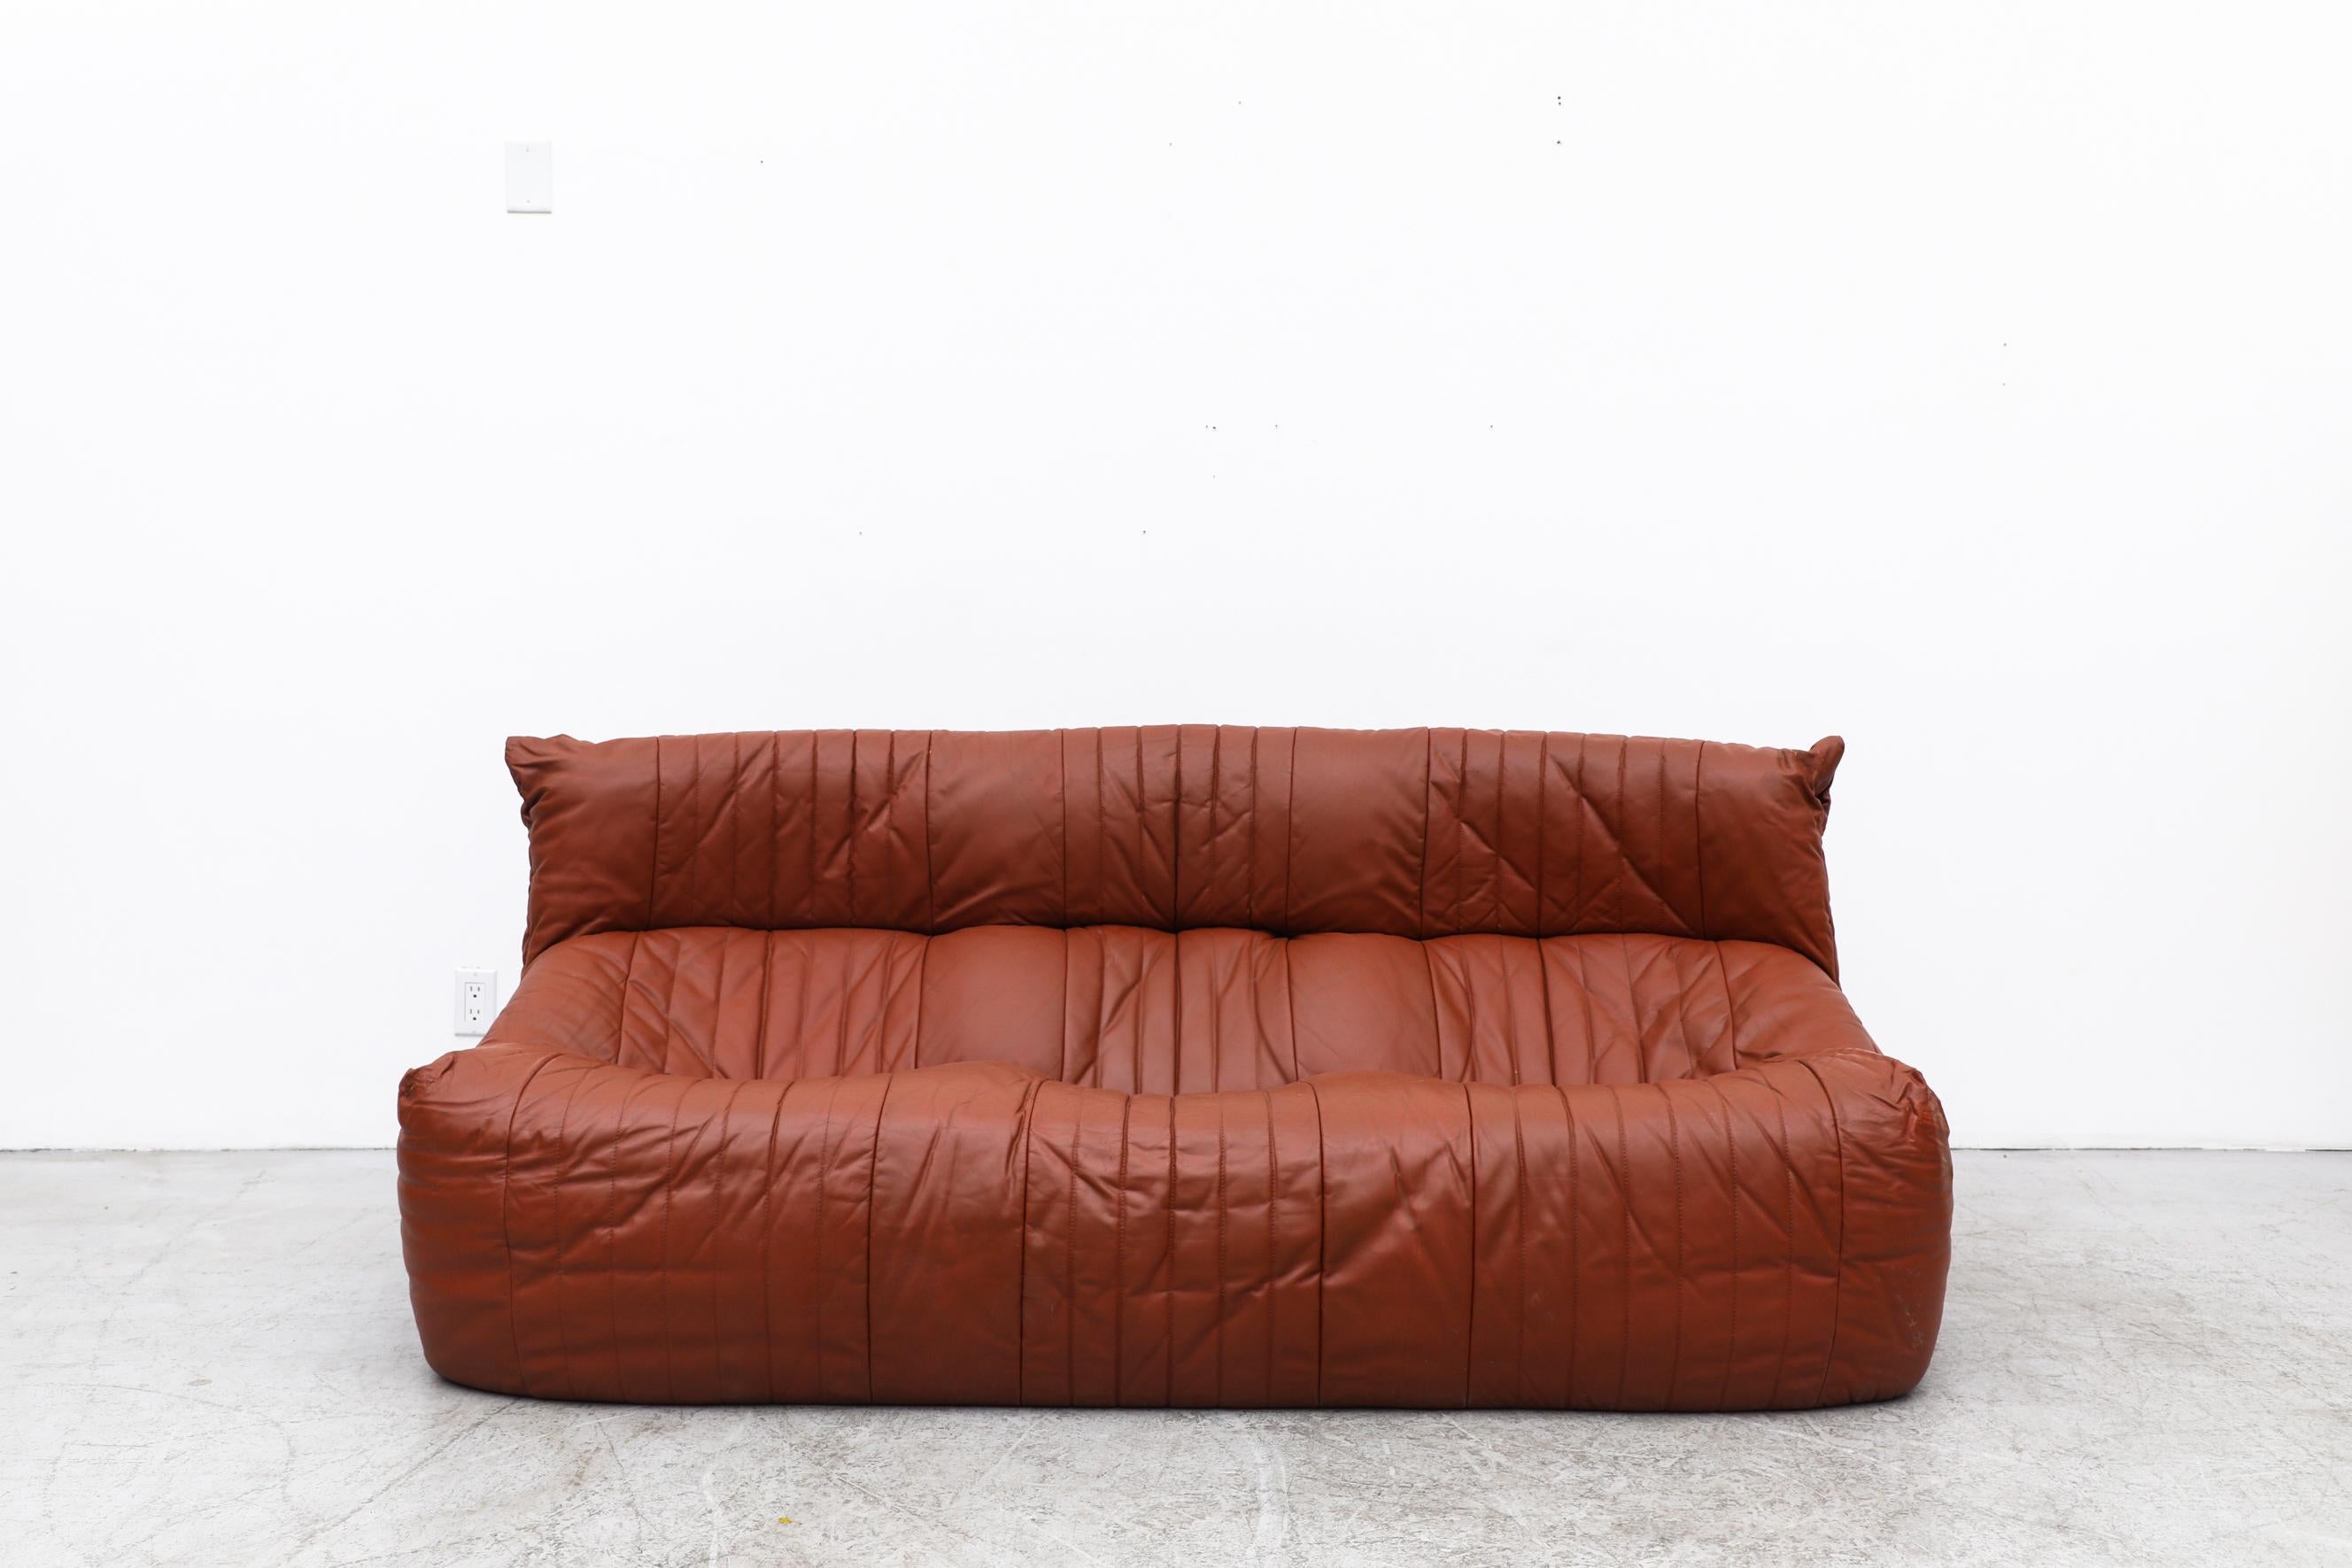 Ligne Roset 'Aralia' sofa by Michel Ducaroy (1925-2009) whose most famous work, the iconic Togo Sofa, marked a highpoint in his career at Ligne Roset. This follows in Togo's footsteps with it's foundation-less comfort and pliable look.
In original